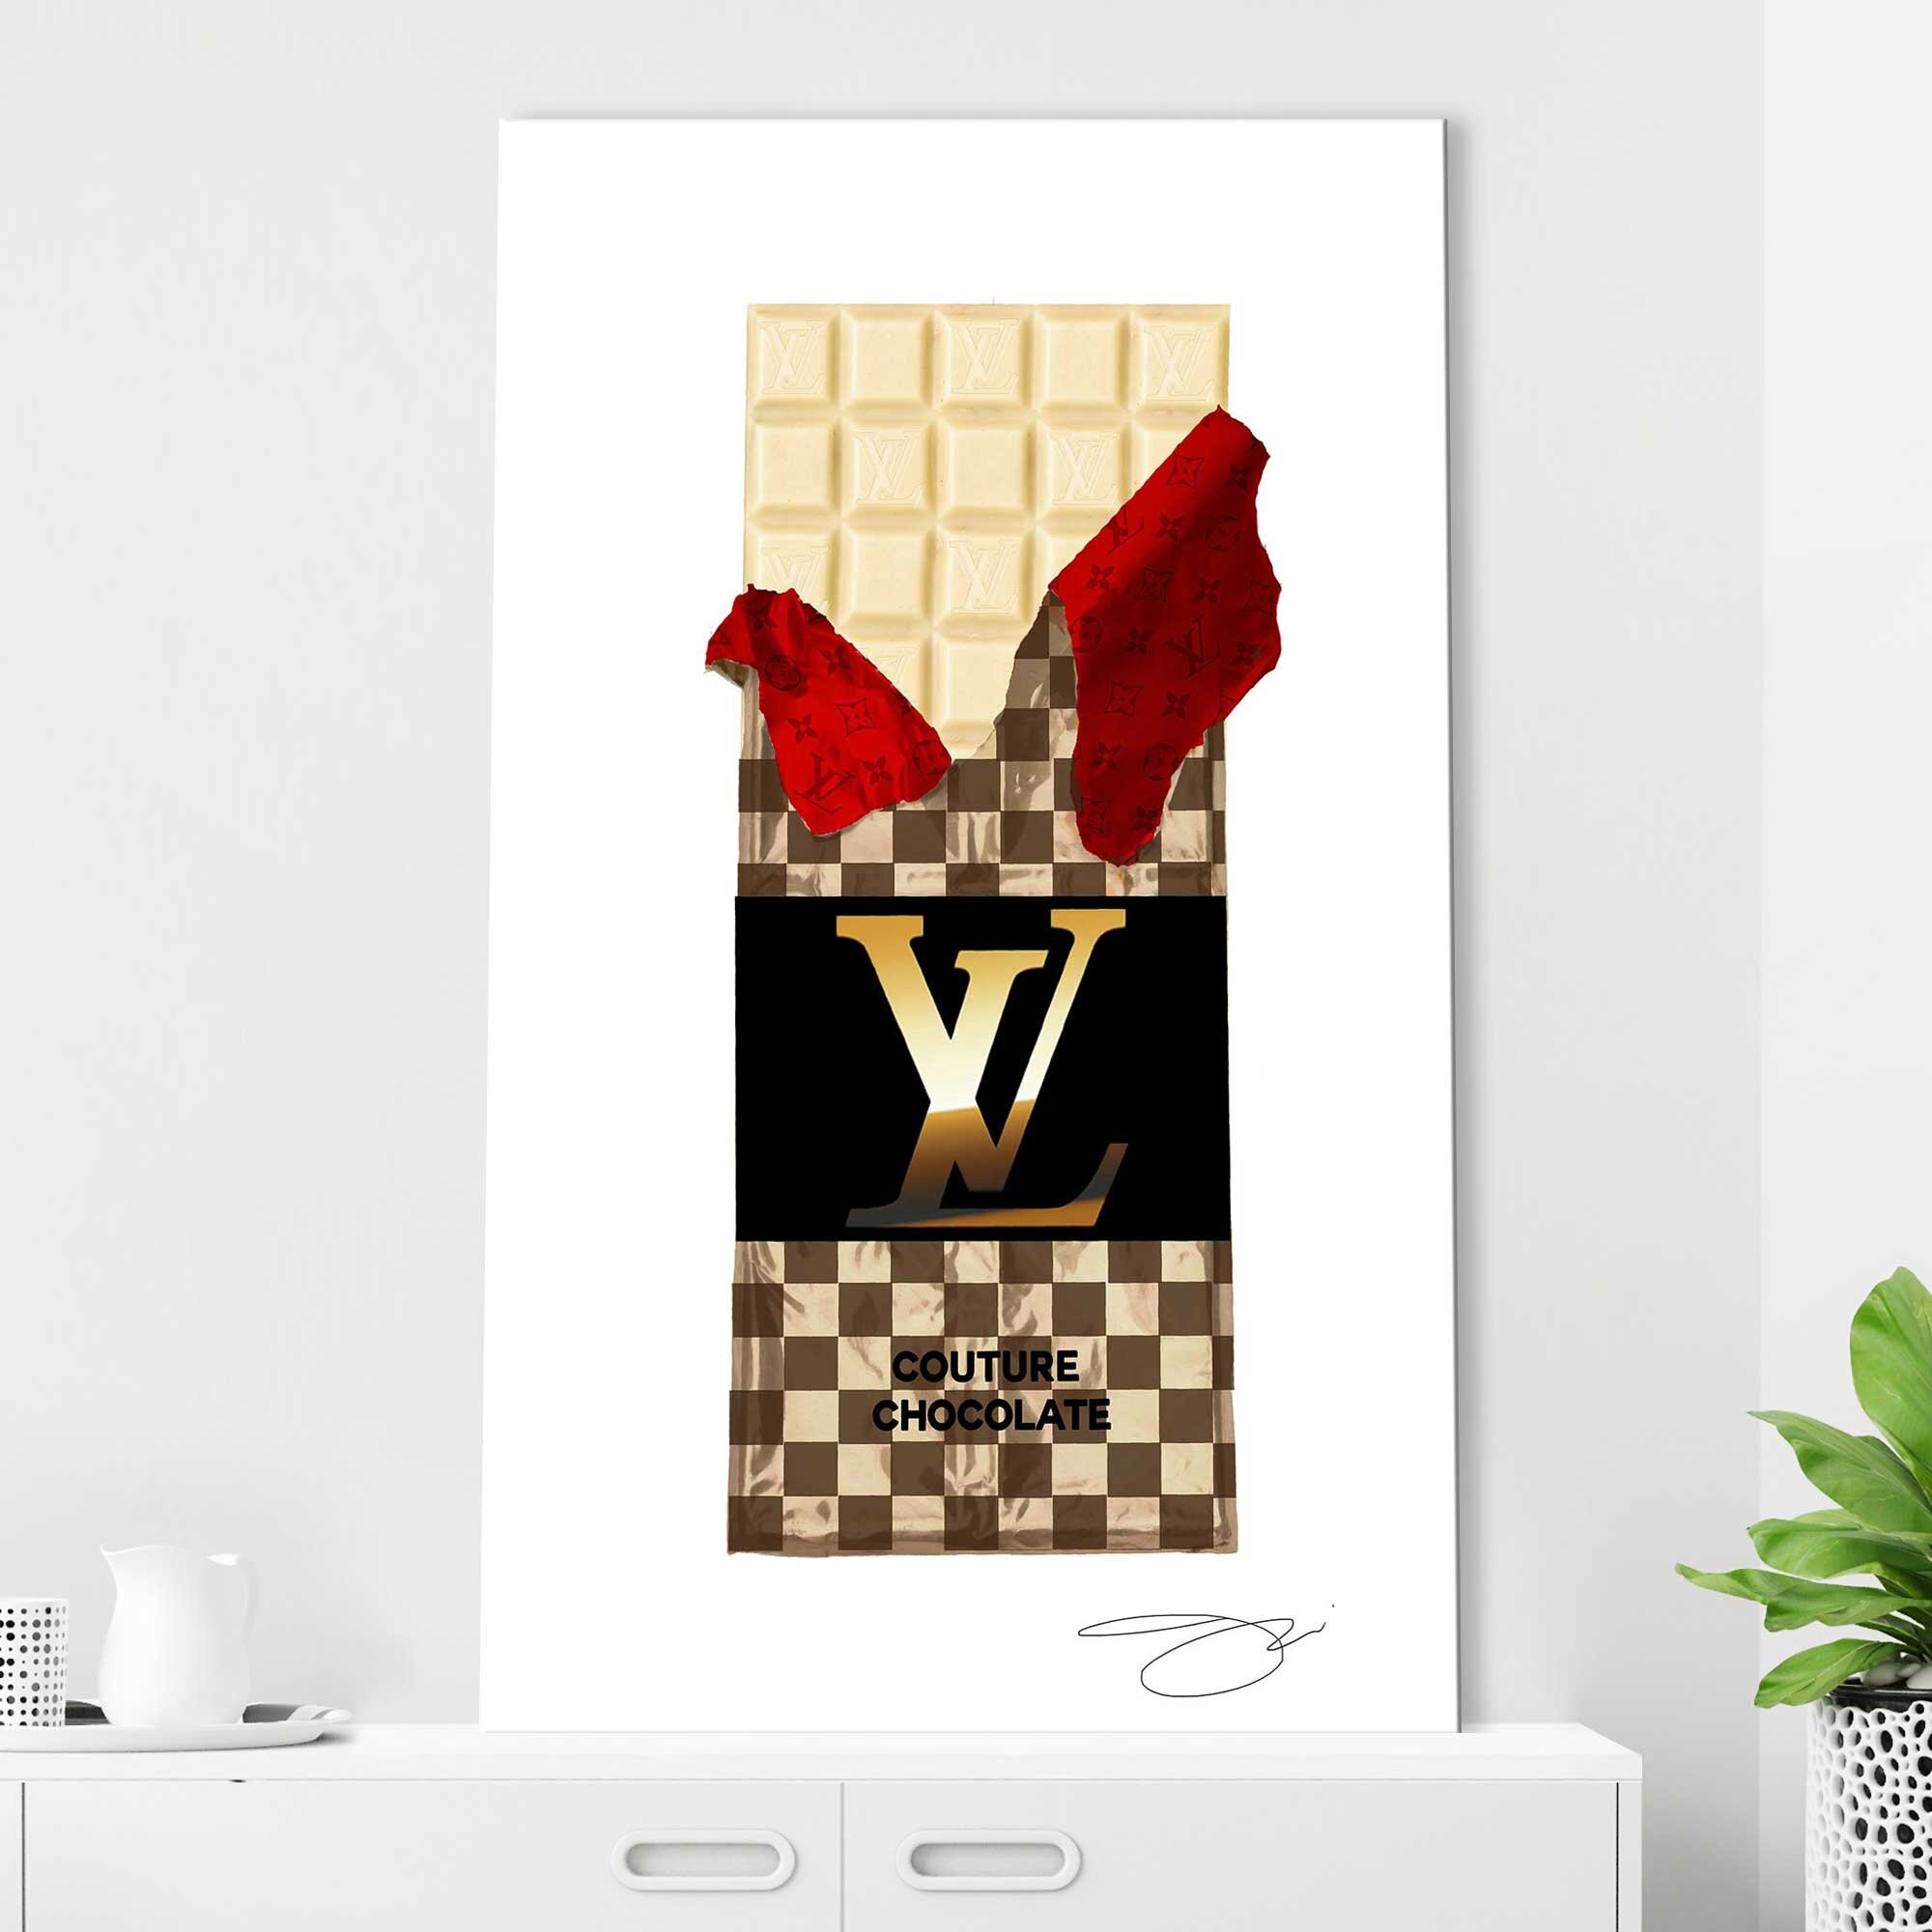 DIY Louis Vuitton  Vuitton styling. Handcrafted whitewall t